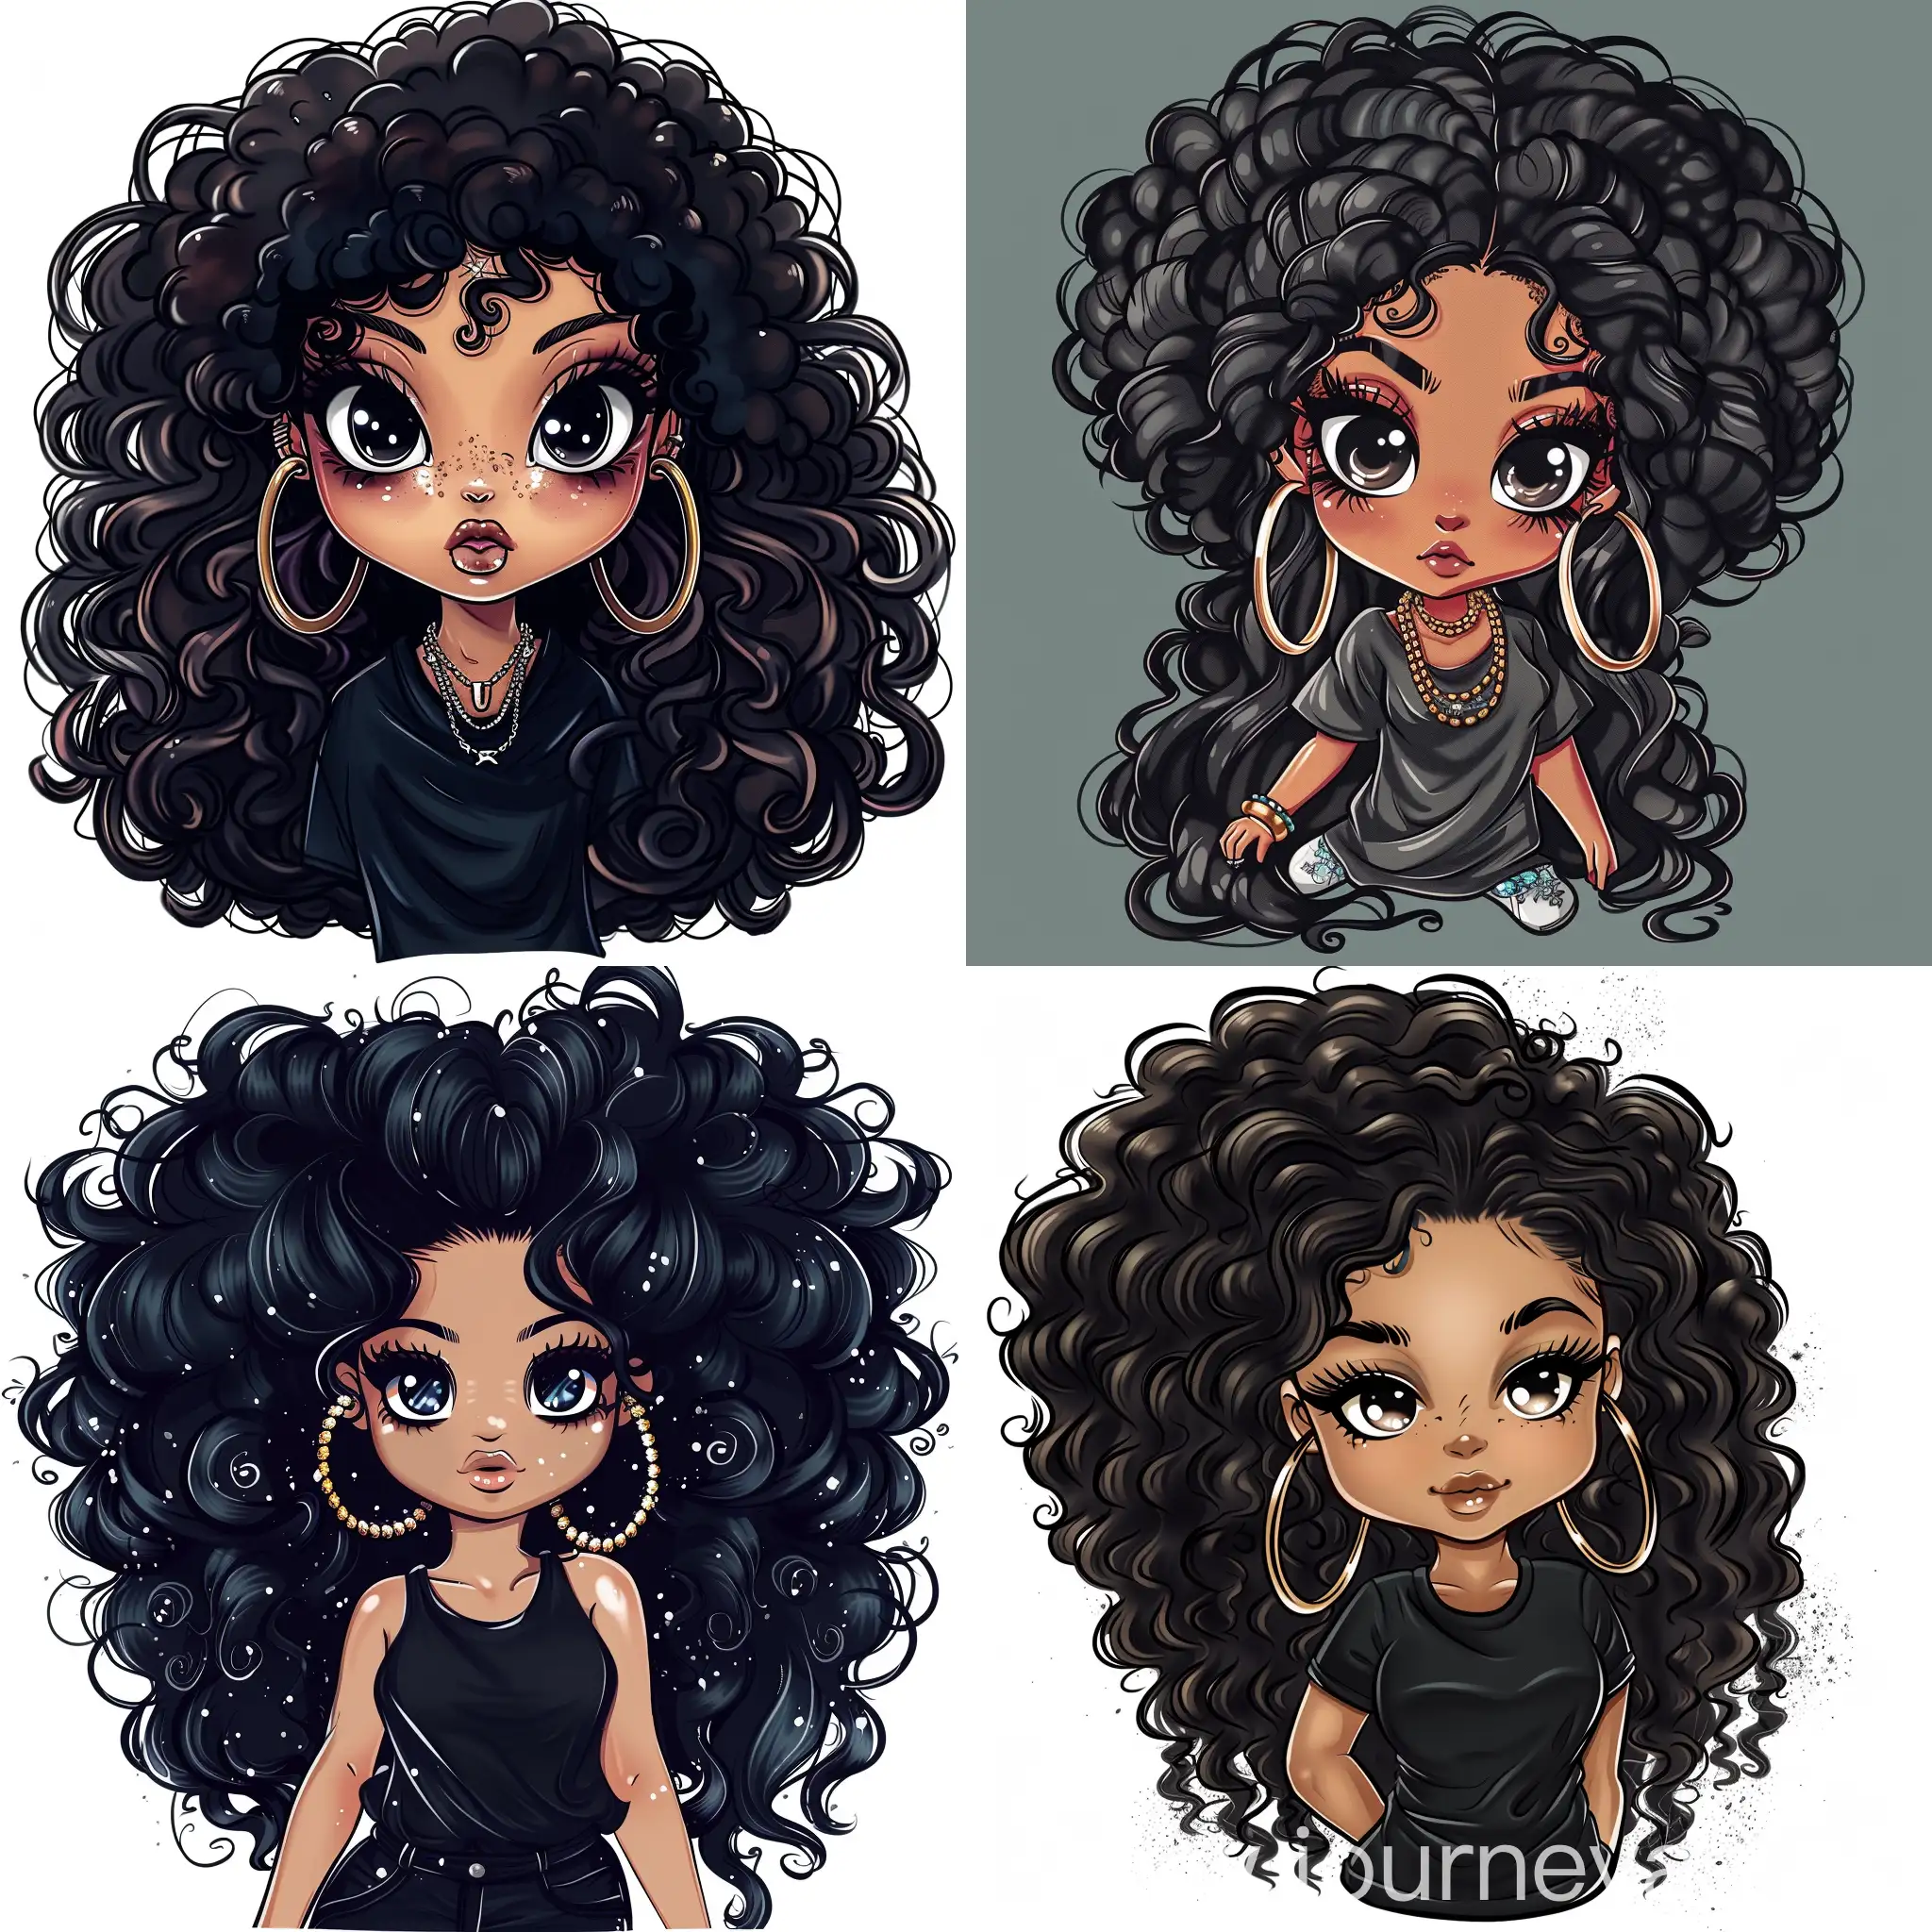 crate a t-shirt desgin of a  black ebony chibi boho with arfo hair curly with large hoop earings  llustration of long hair black girl with l arfo hair illustration